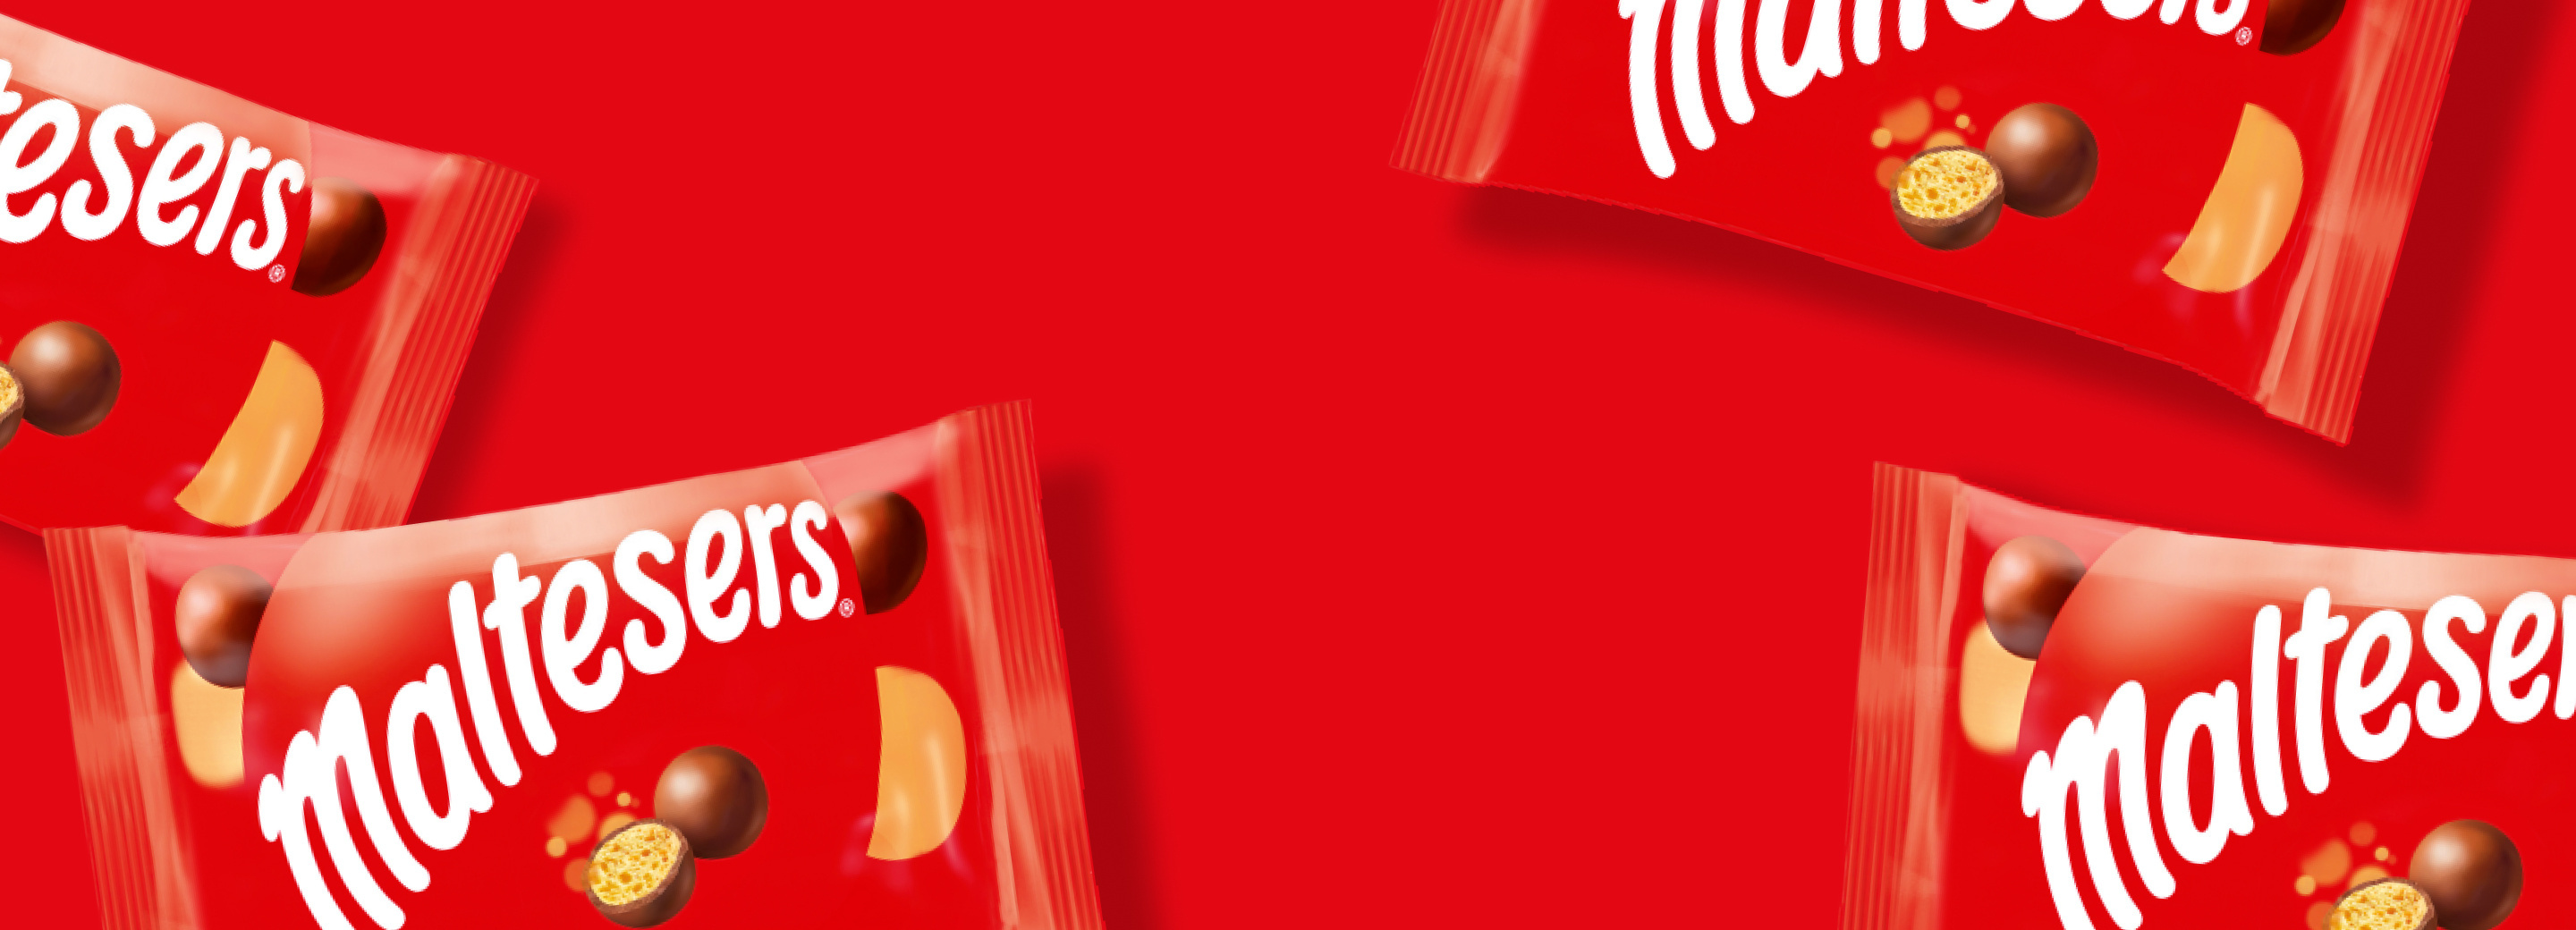 Bags of Maltesers on a red background